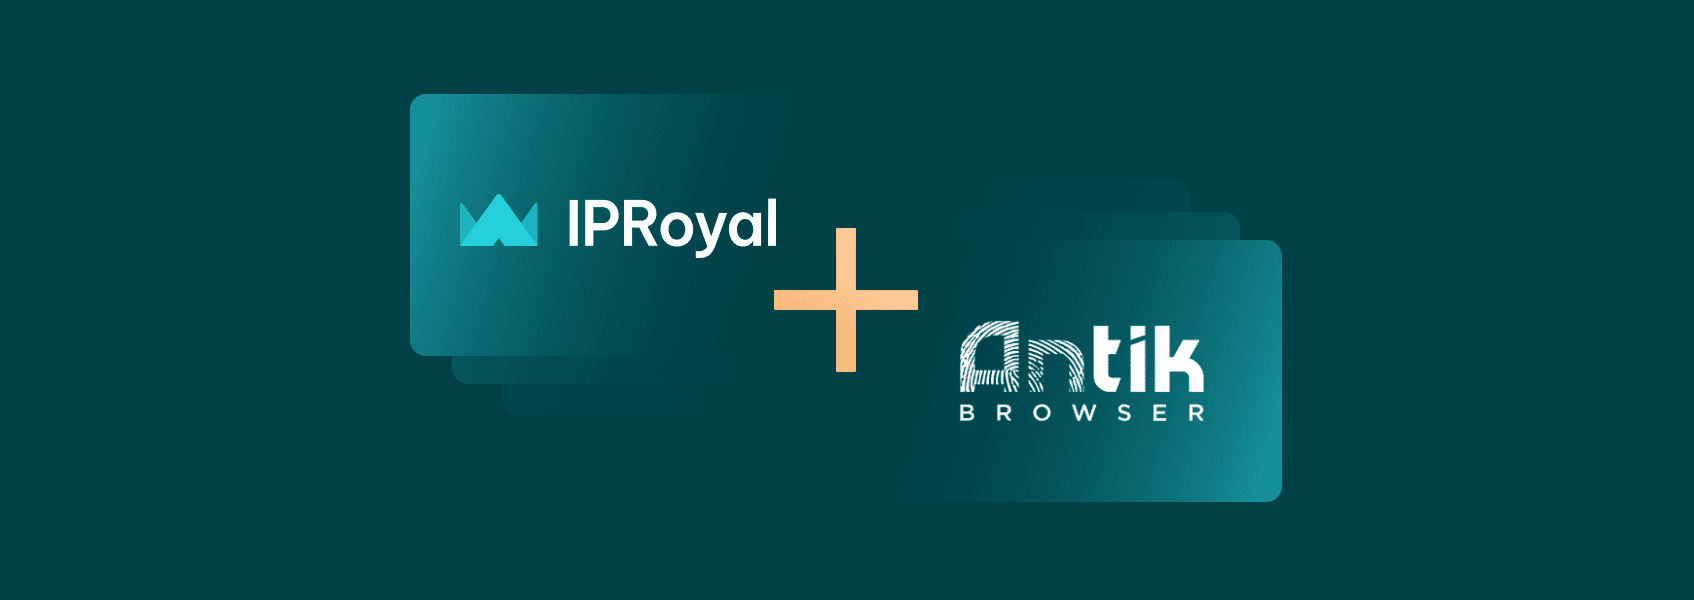 How to Set Up an Antik Browser Proxy With IPRoyal